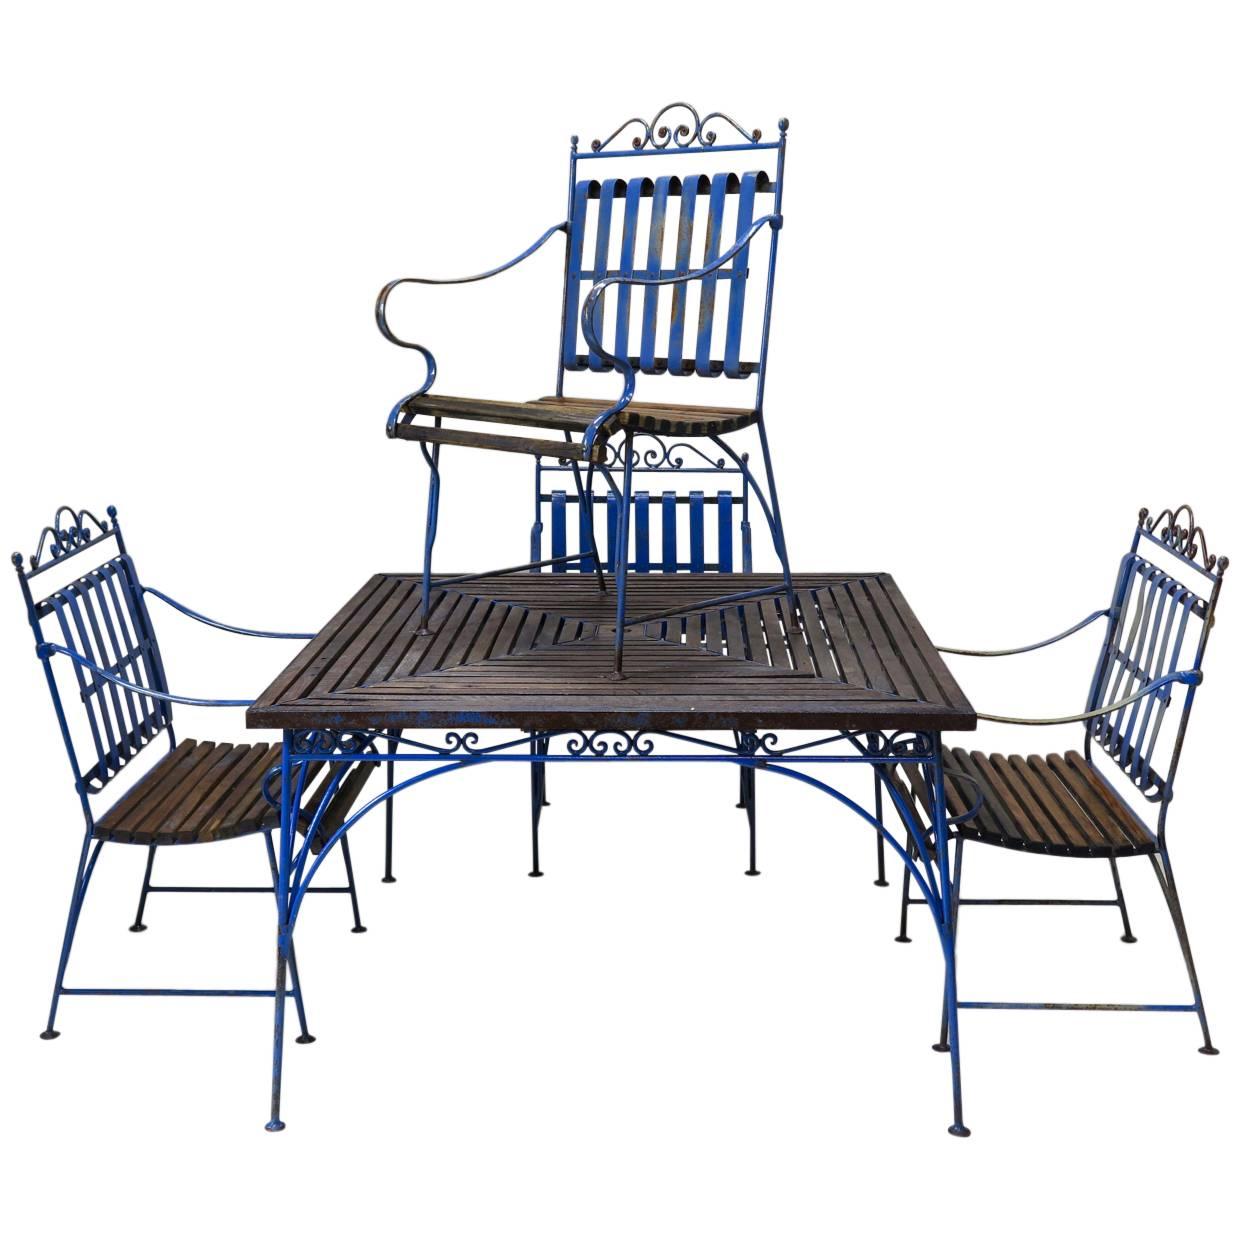 Lovely French 1930s Wrought Iron and Wood Garden Table with Four Armchairs